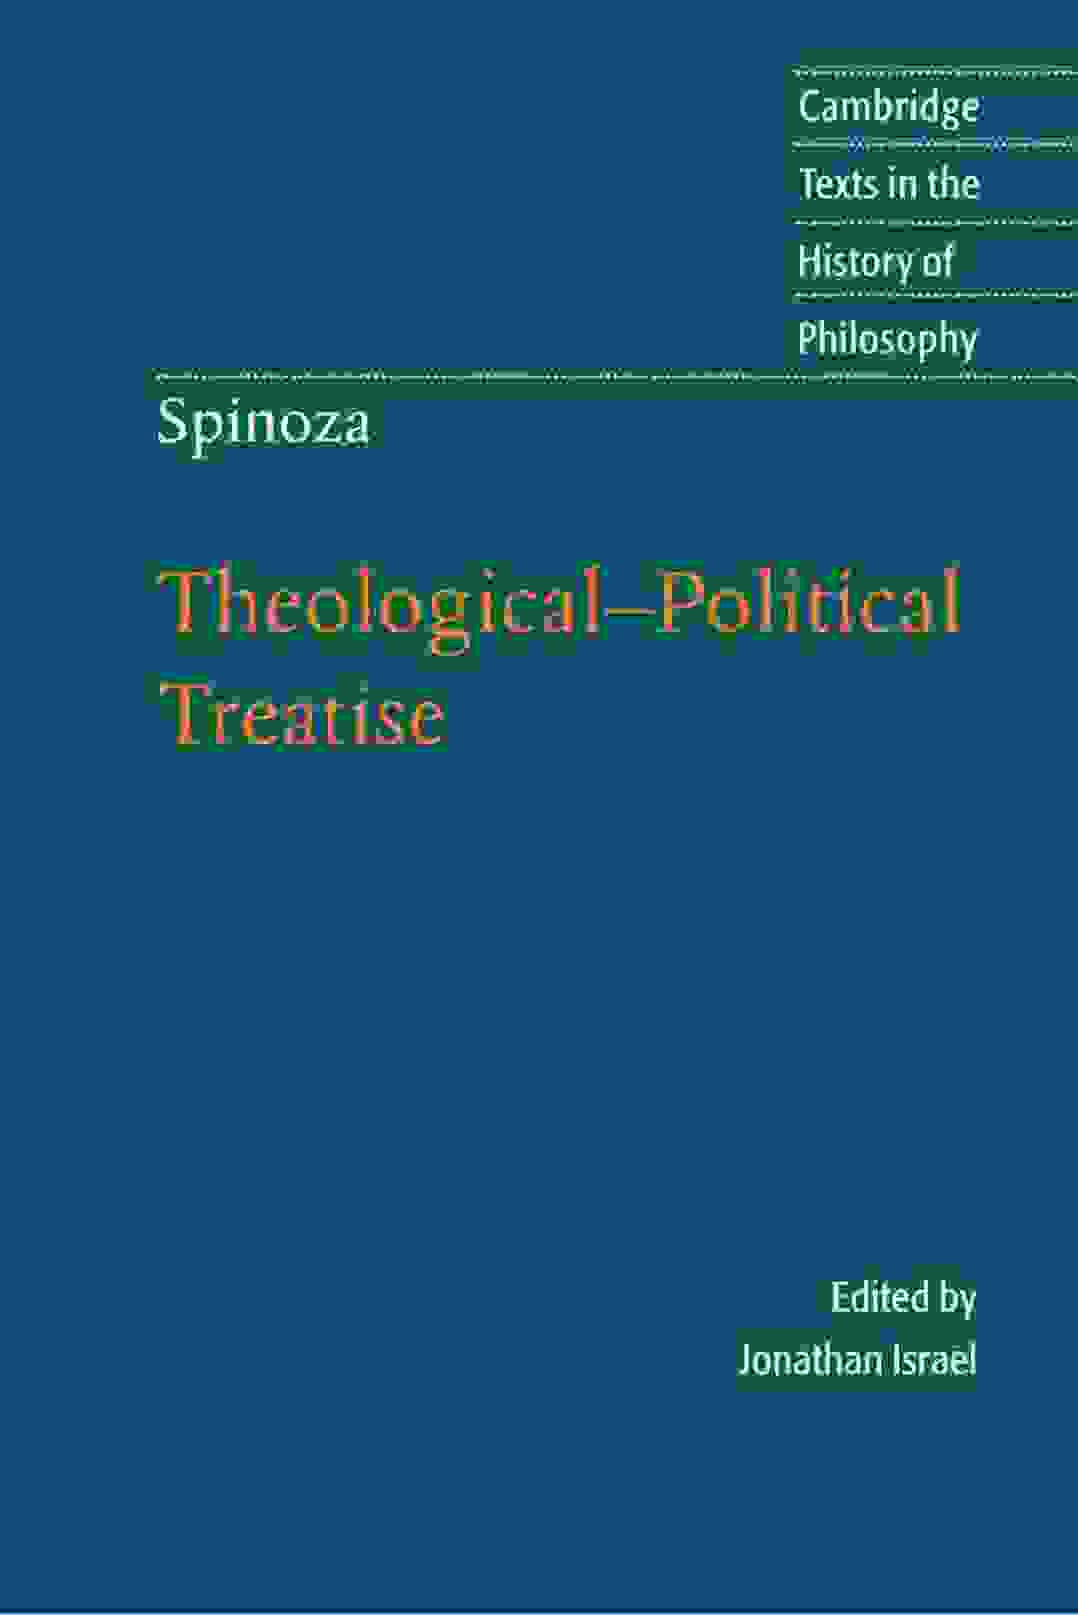 Theologico-Political Treatise -- Part 1